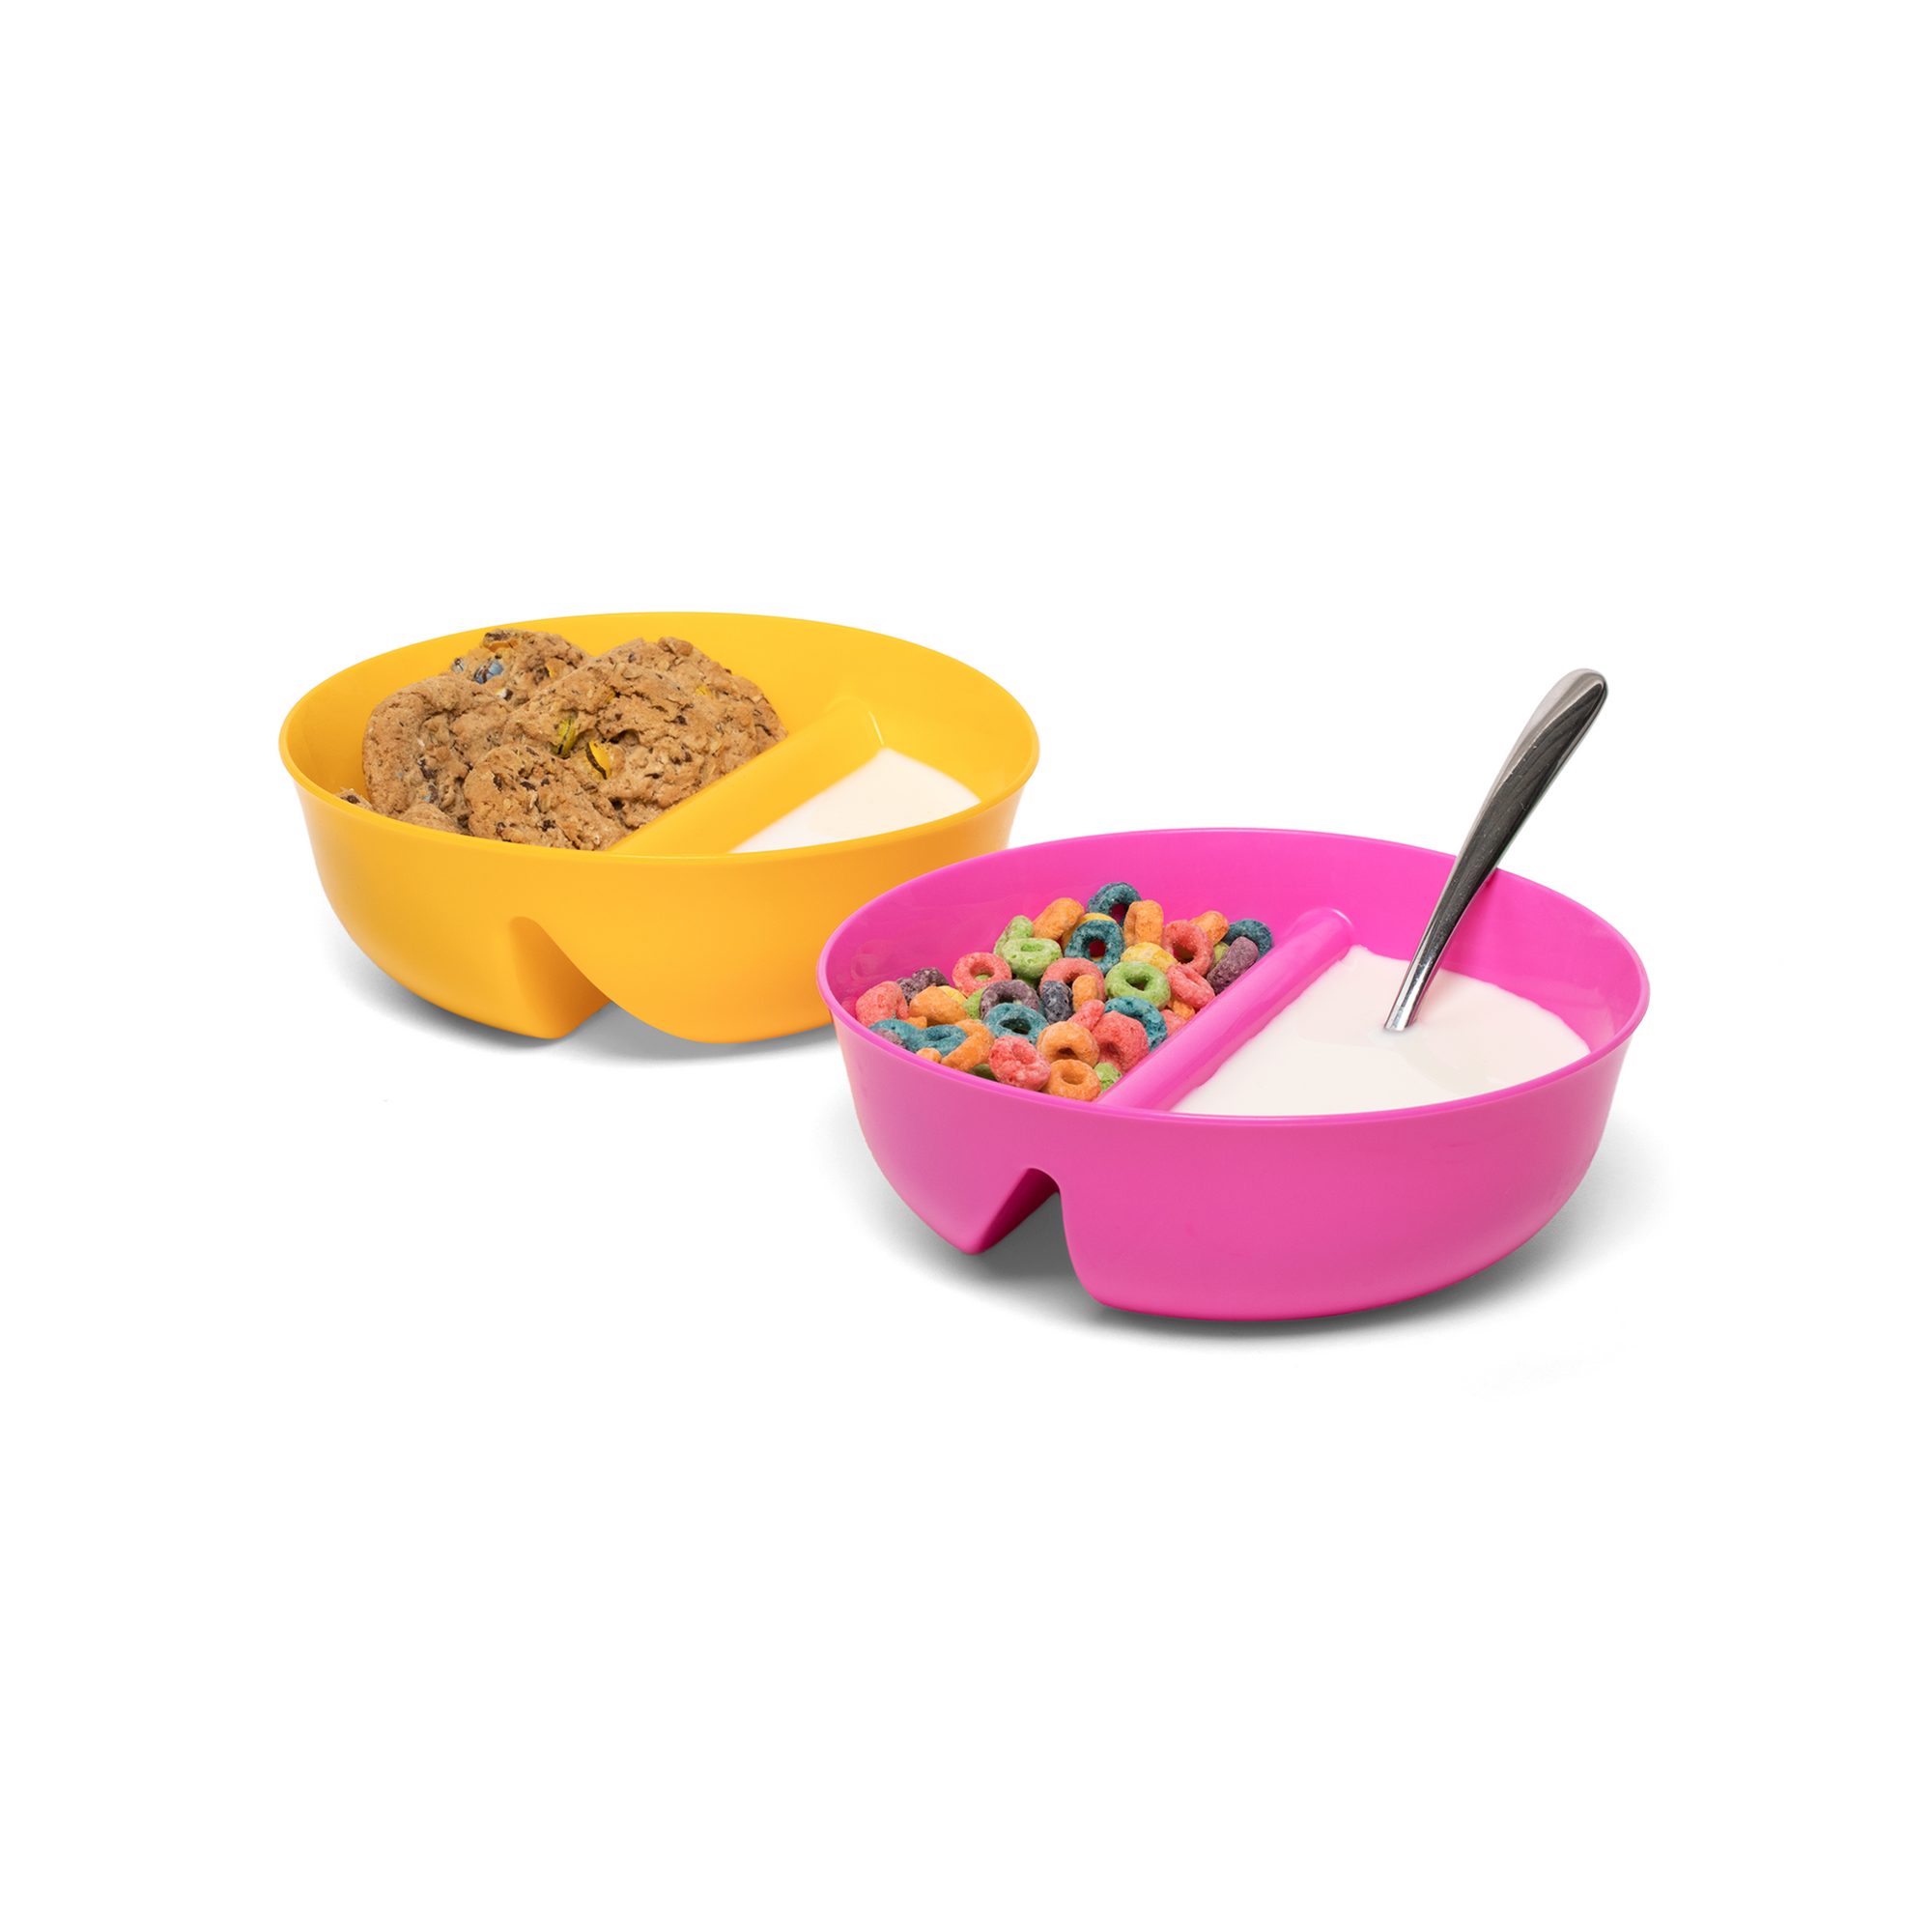 Cereal On the Go Cups Breakfast Drink Cups Portable Yogurt